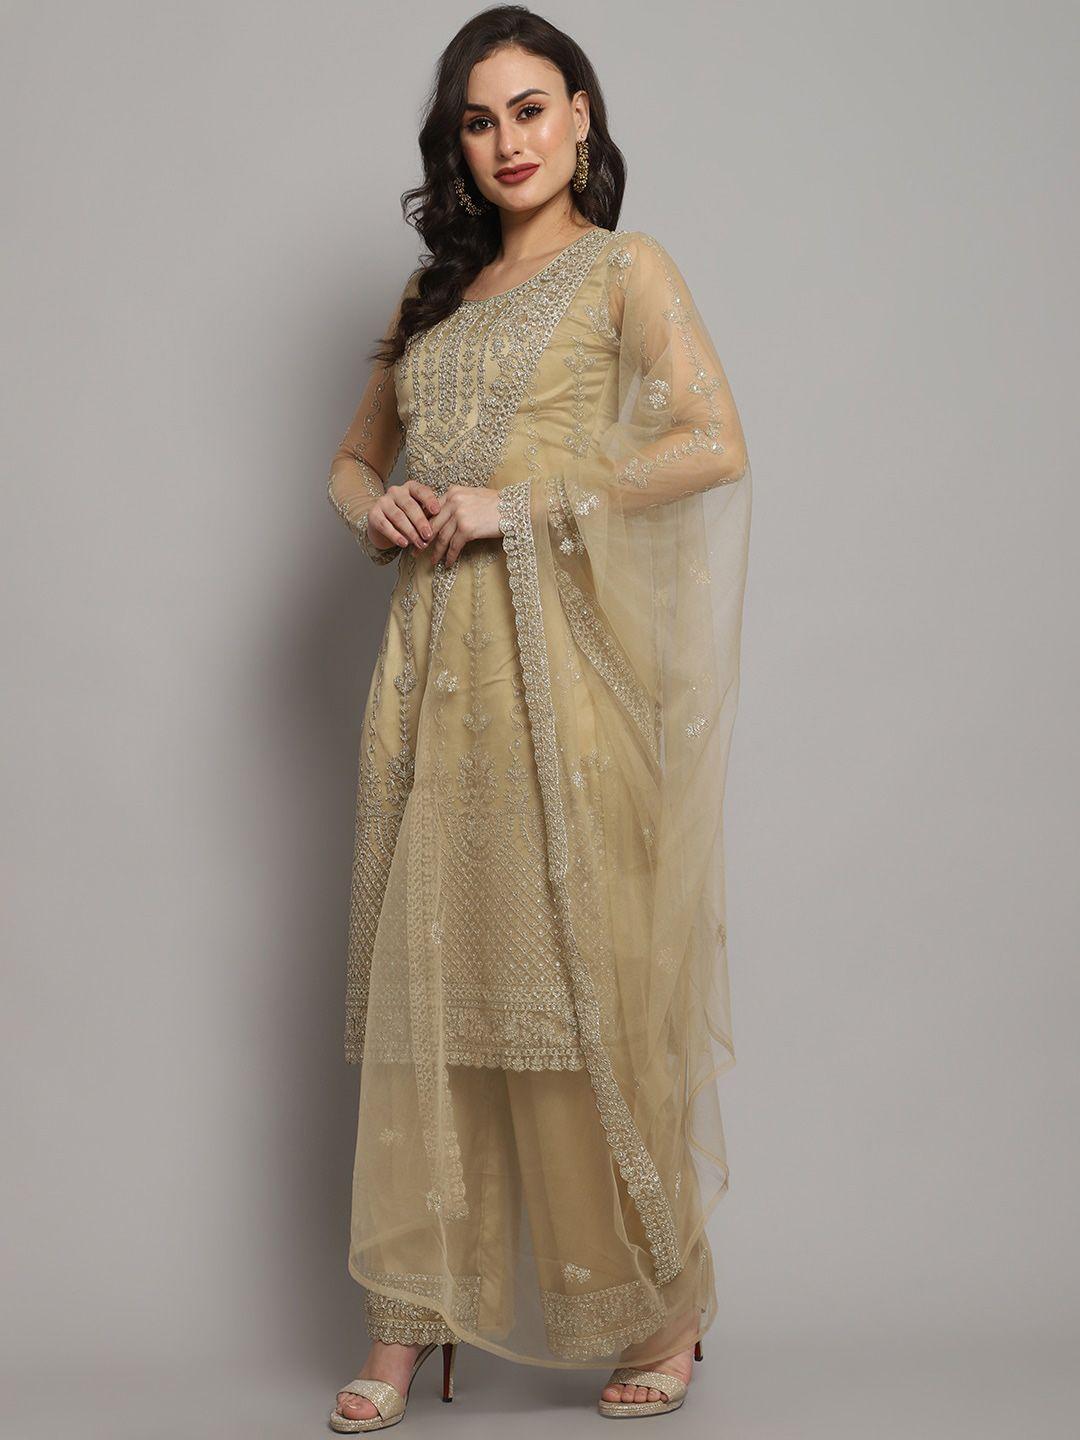 Stylee LIFESTYLE Beige & Silver-Toned Embroidered Unstitched Dress Material